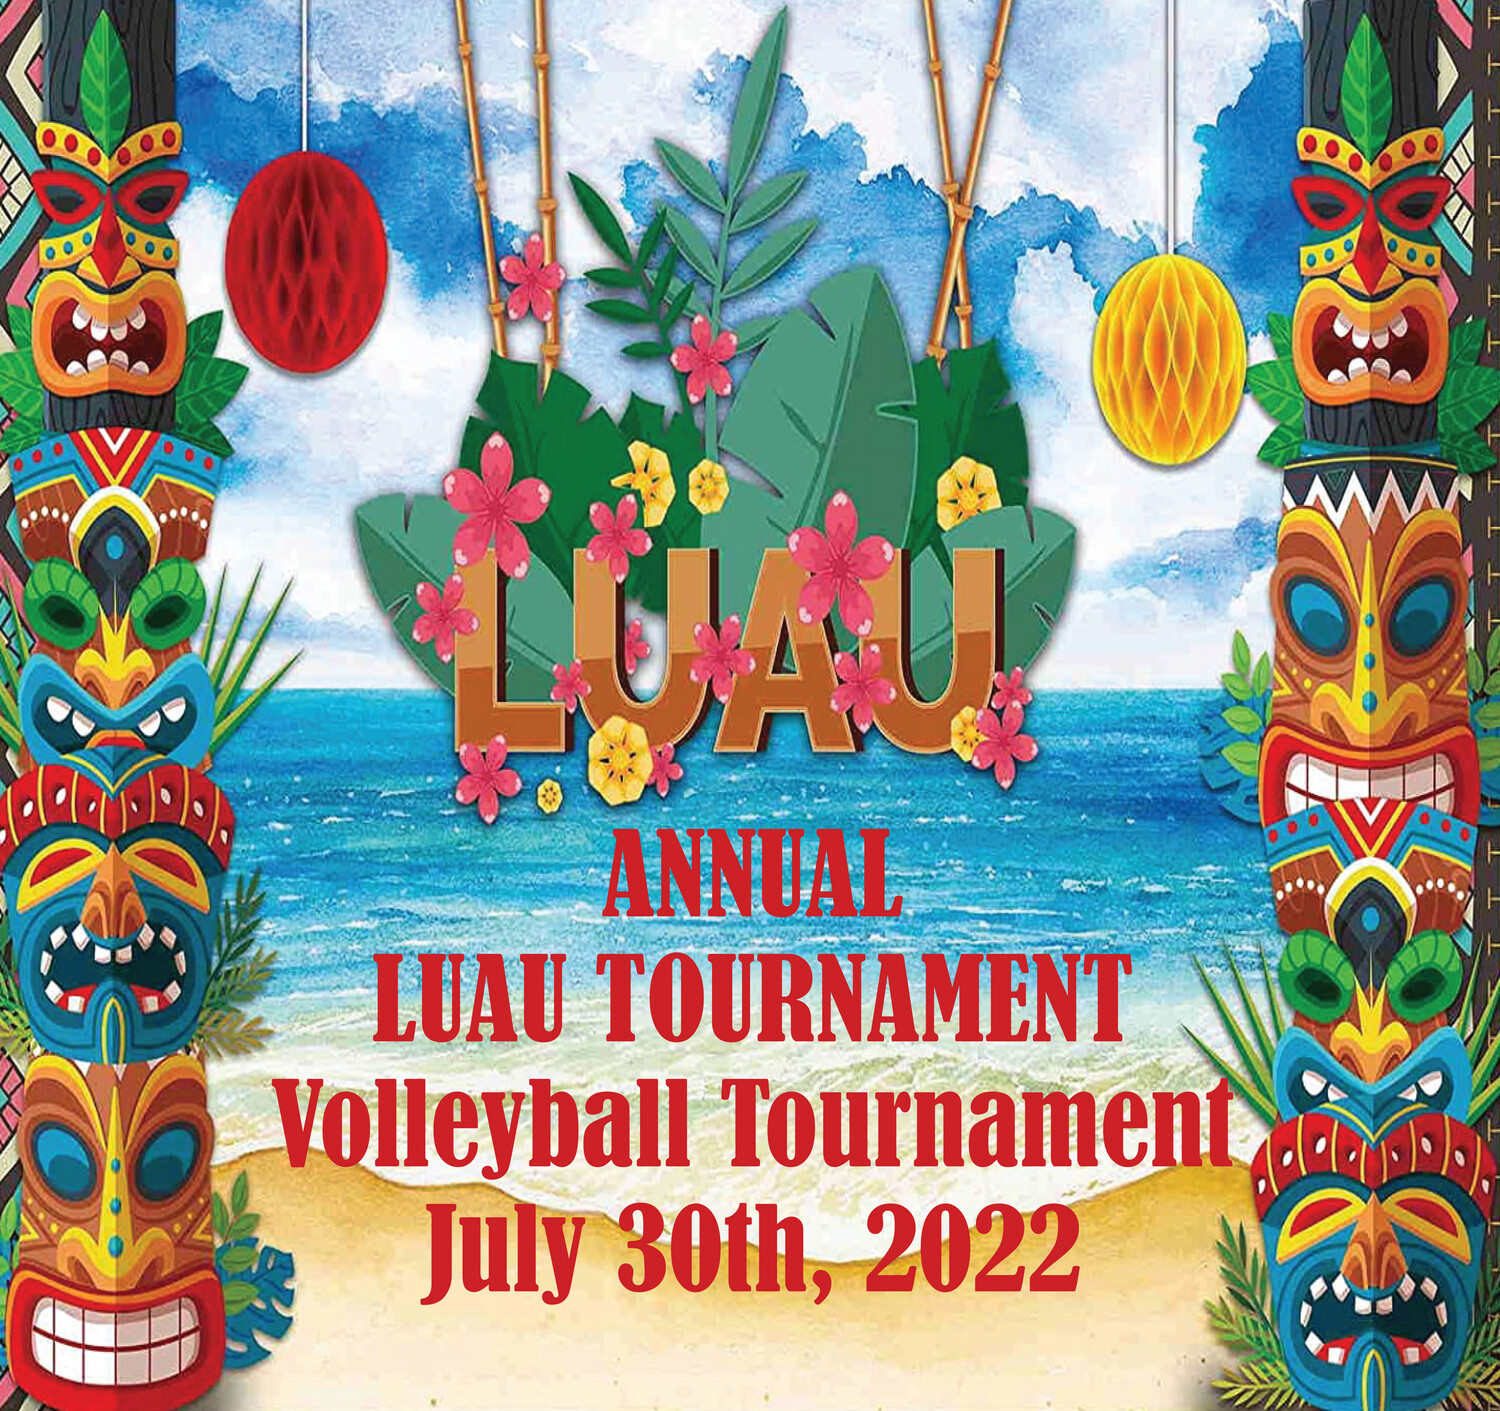 Annual Luau Tournament - Soliday's July 30th, 2022